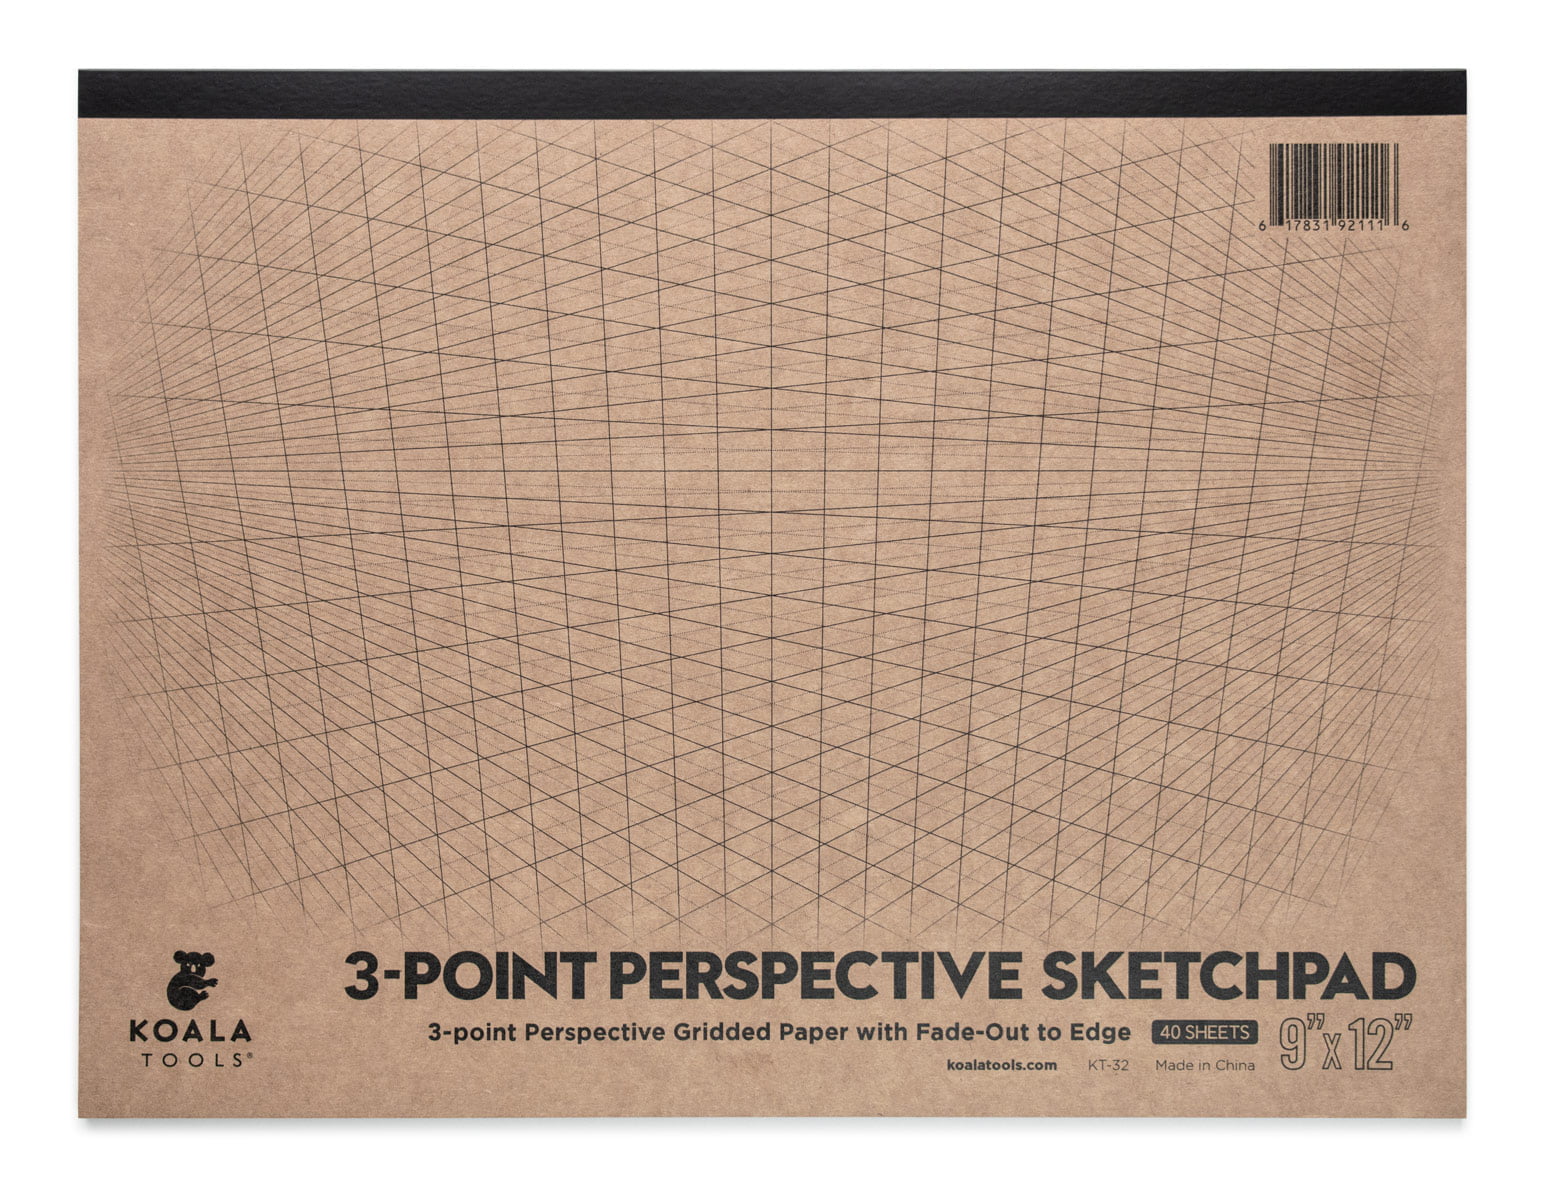 Perspective Transparency Set - 1 Point Perspective, 2 Point Perspective, 3  Point Perspective and 5-point Perspective (Fish Eye Grid) – Koala Tools